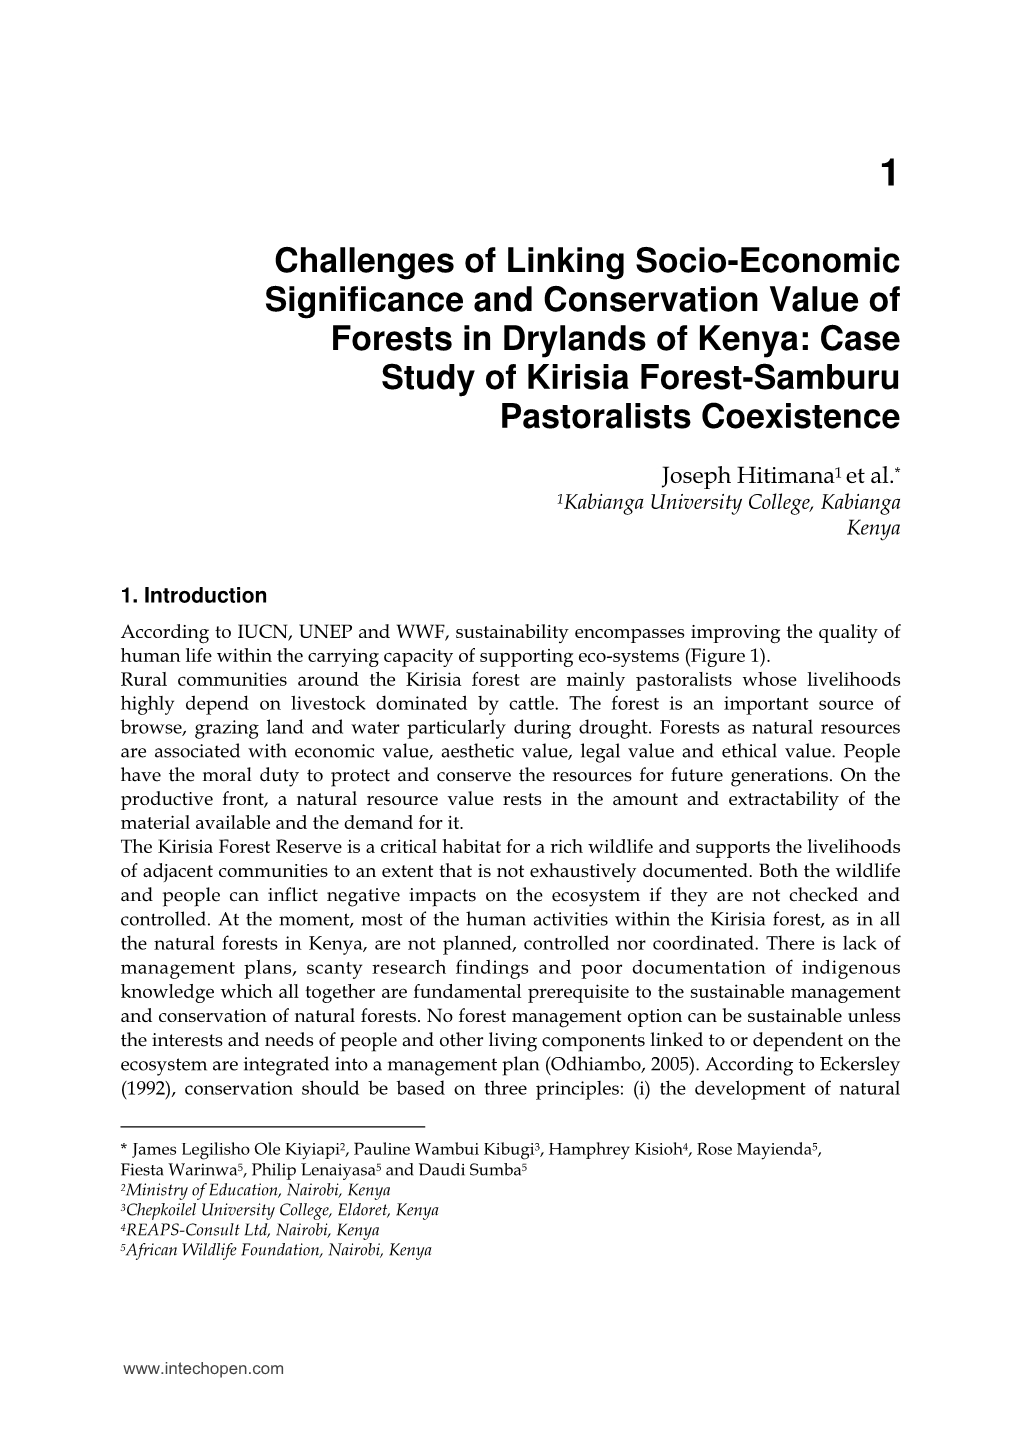 Challenges of Linking Socio-Economic Significance And